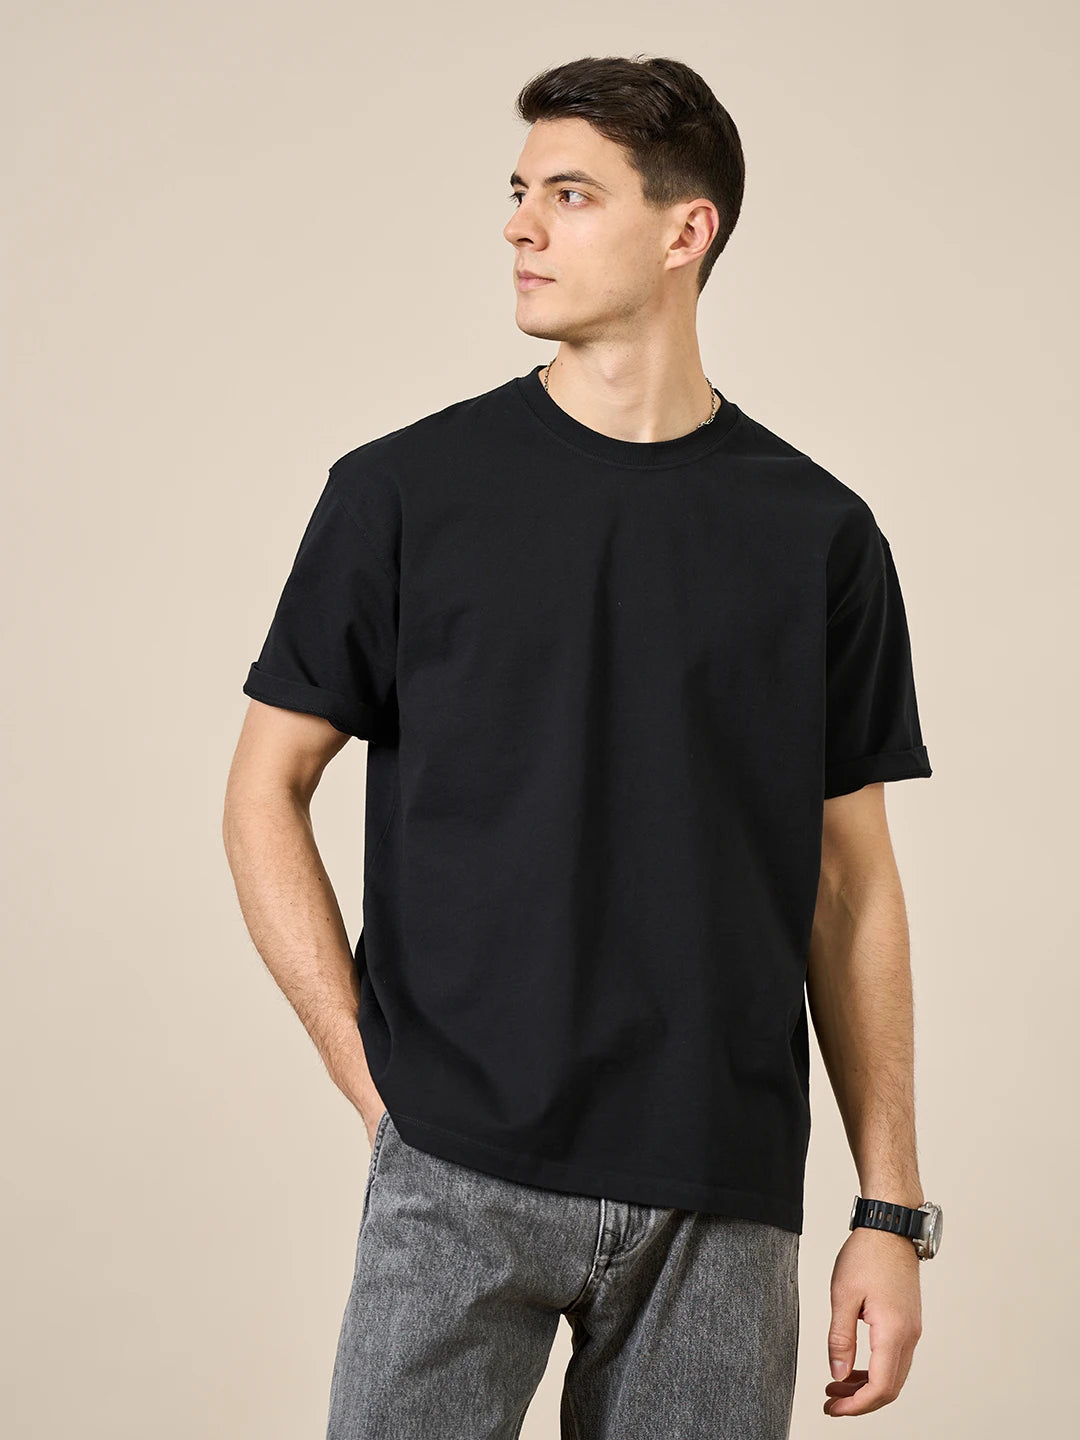 T-shirt Men High Quality Solid Color Drop Sleeve Loose